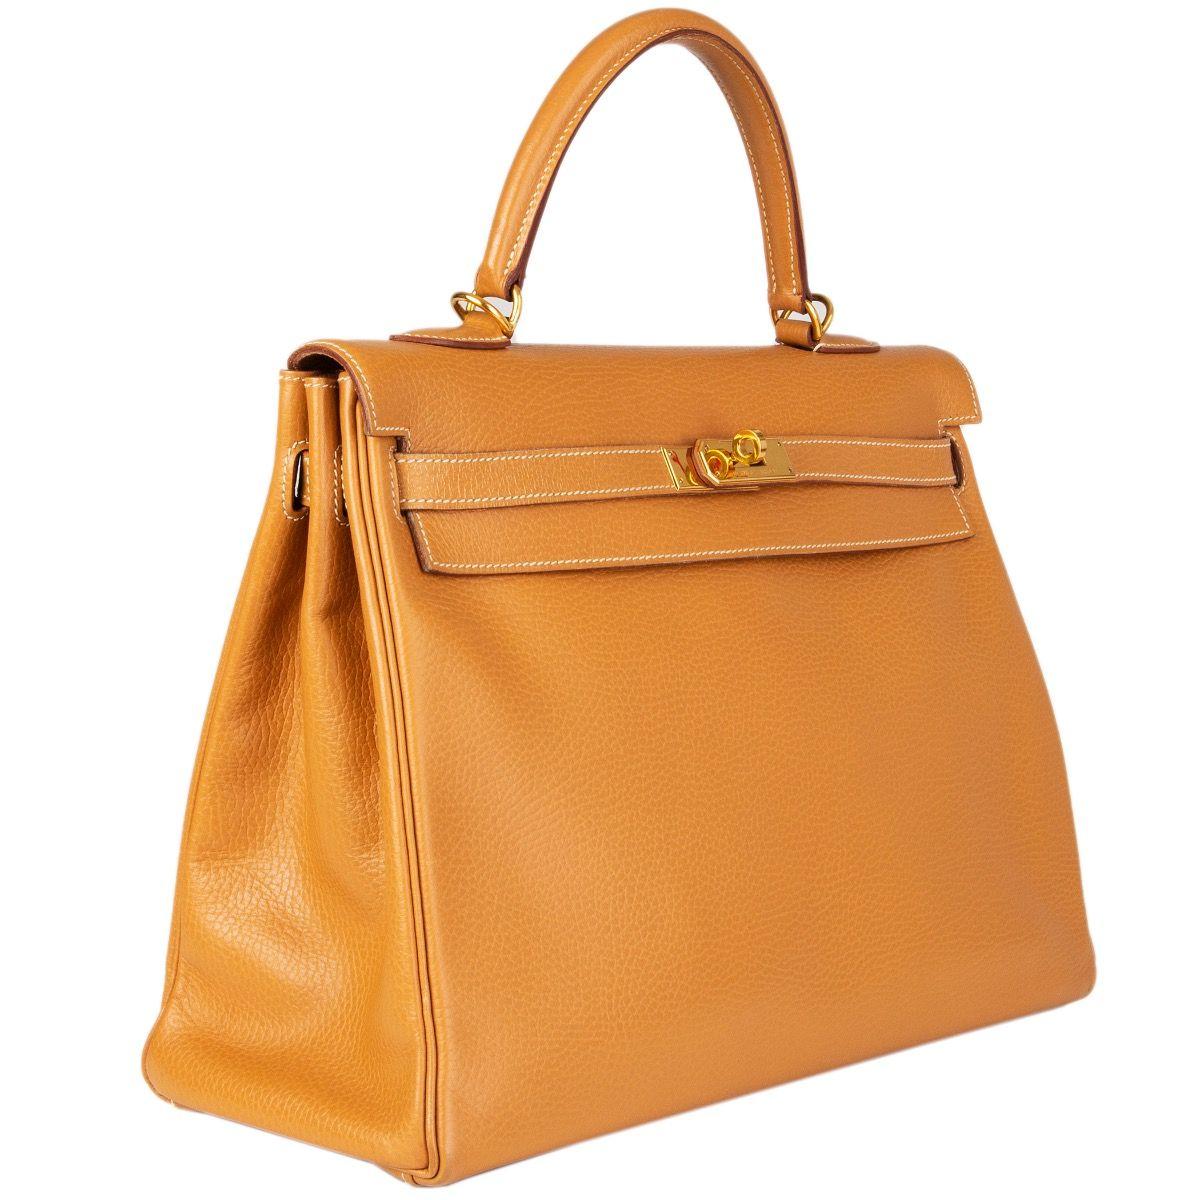 Hermes 'Kelly II 35 Retourner' bag in Naturelle (beige) Vache Ardennes leather with contrasting white stitching. Lined in Chevre (goat skin) with two open pockets against the front and a zipper pocket against the back. Has been carried and with